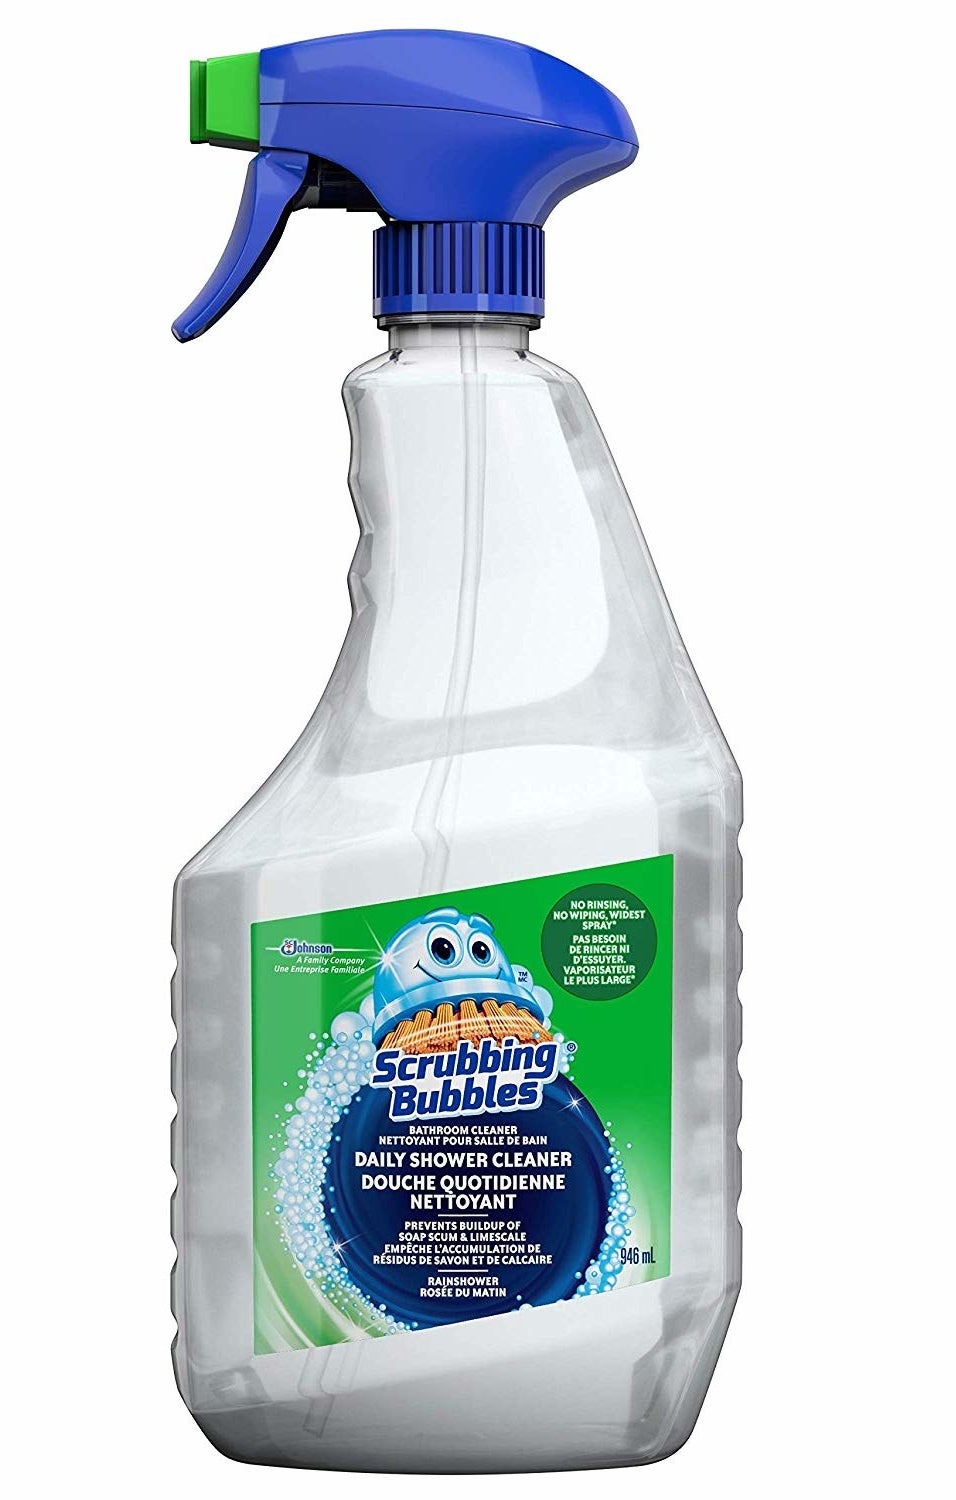 A bottle of cleaning spray